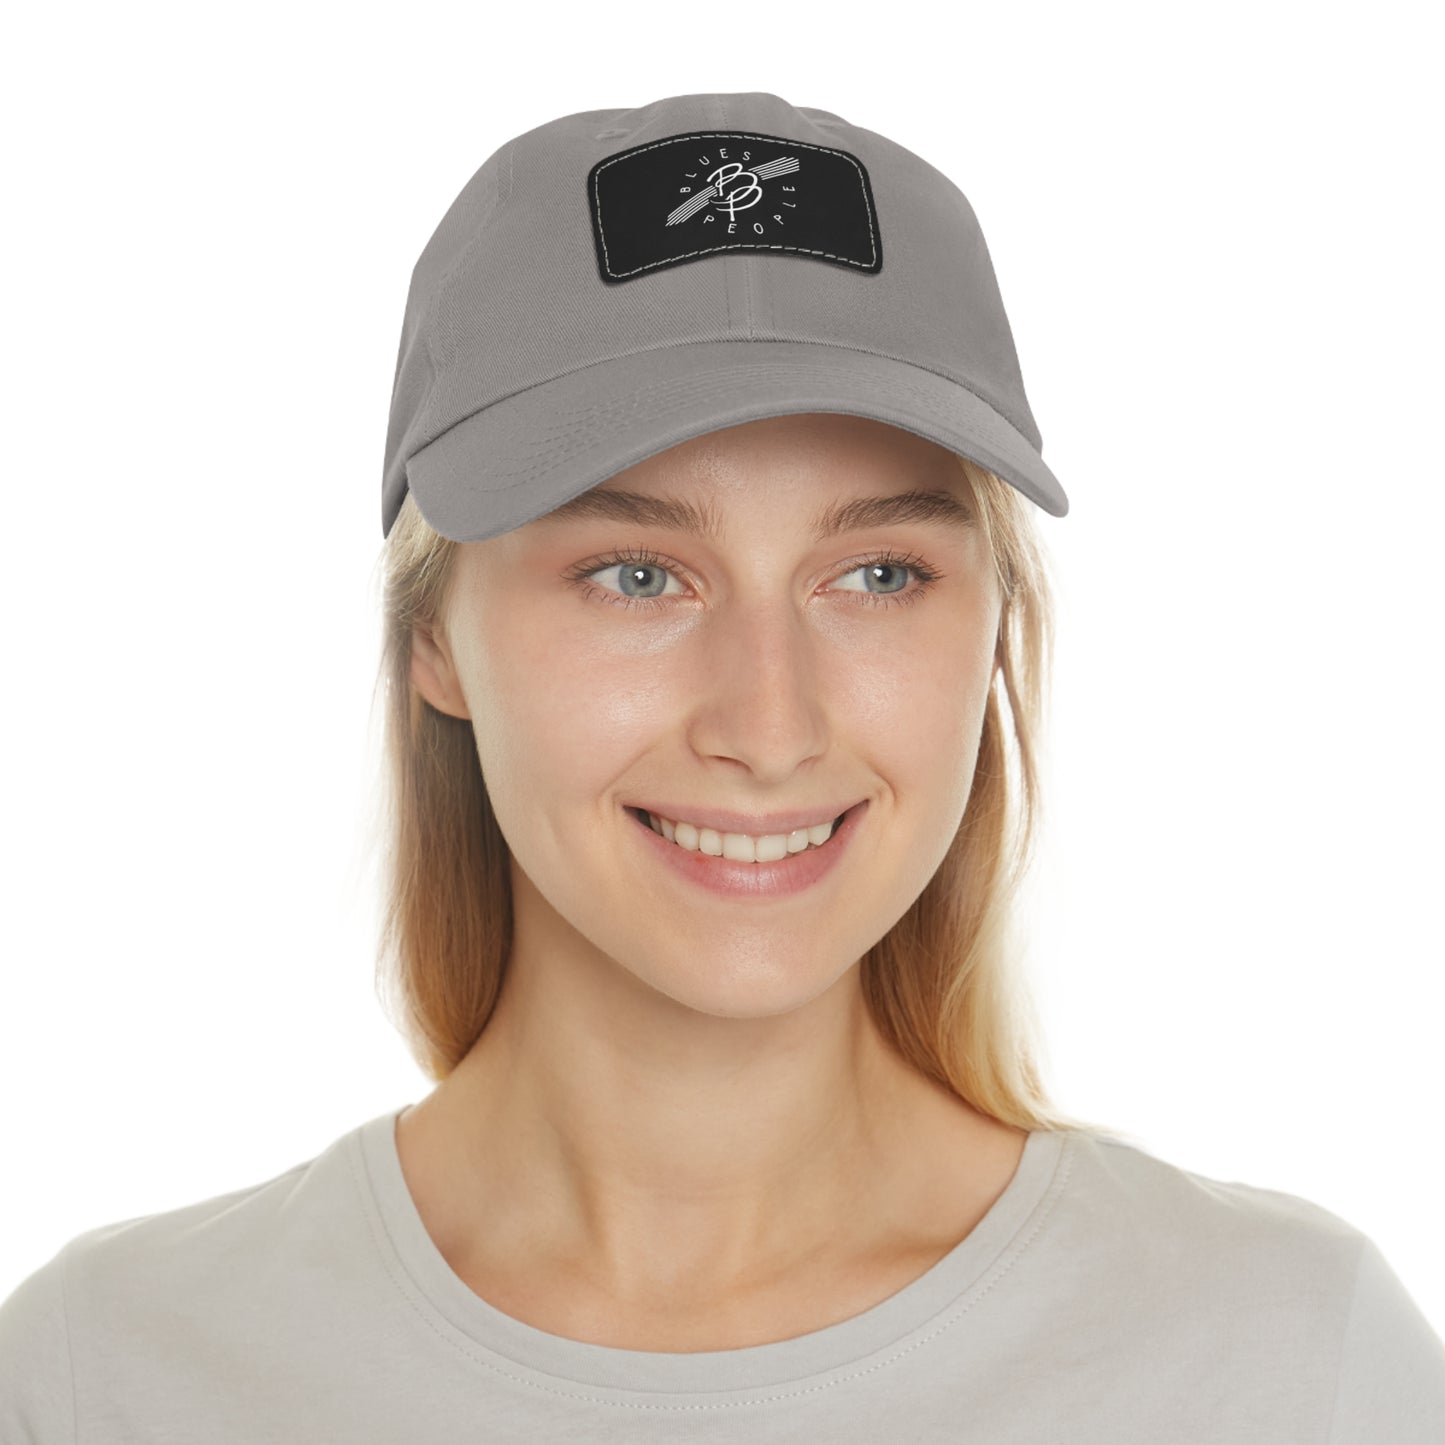 Low Profile Hat with Leather Patch (Rectangle) - White Logo